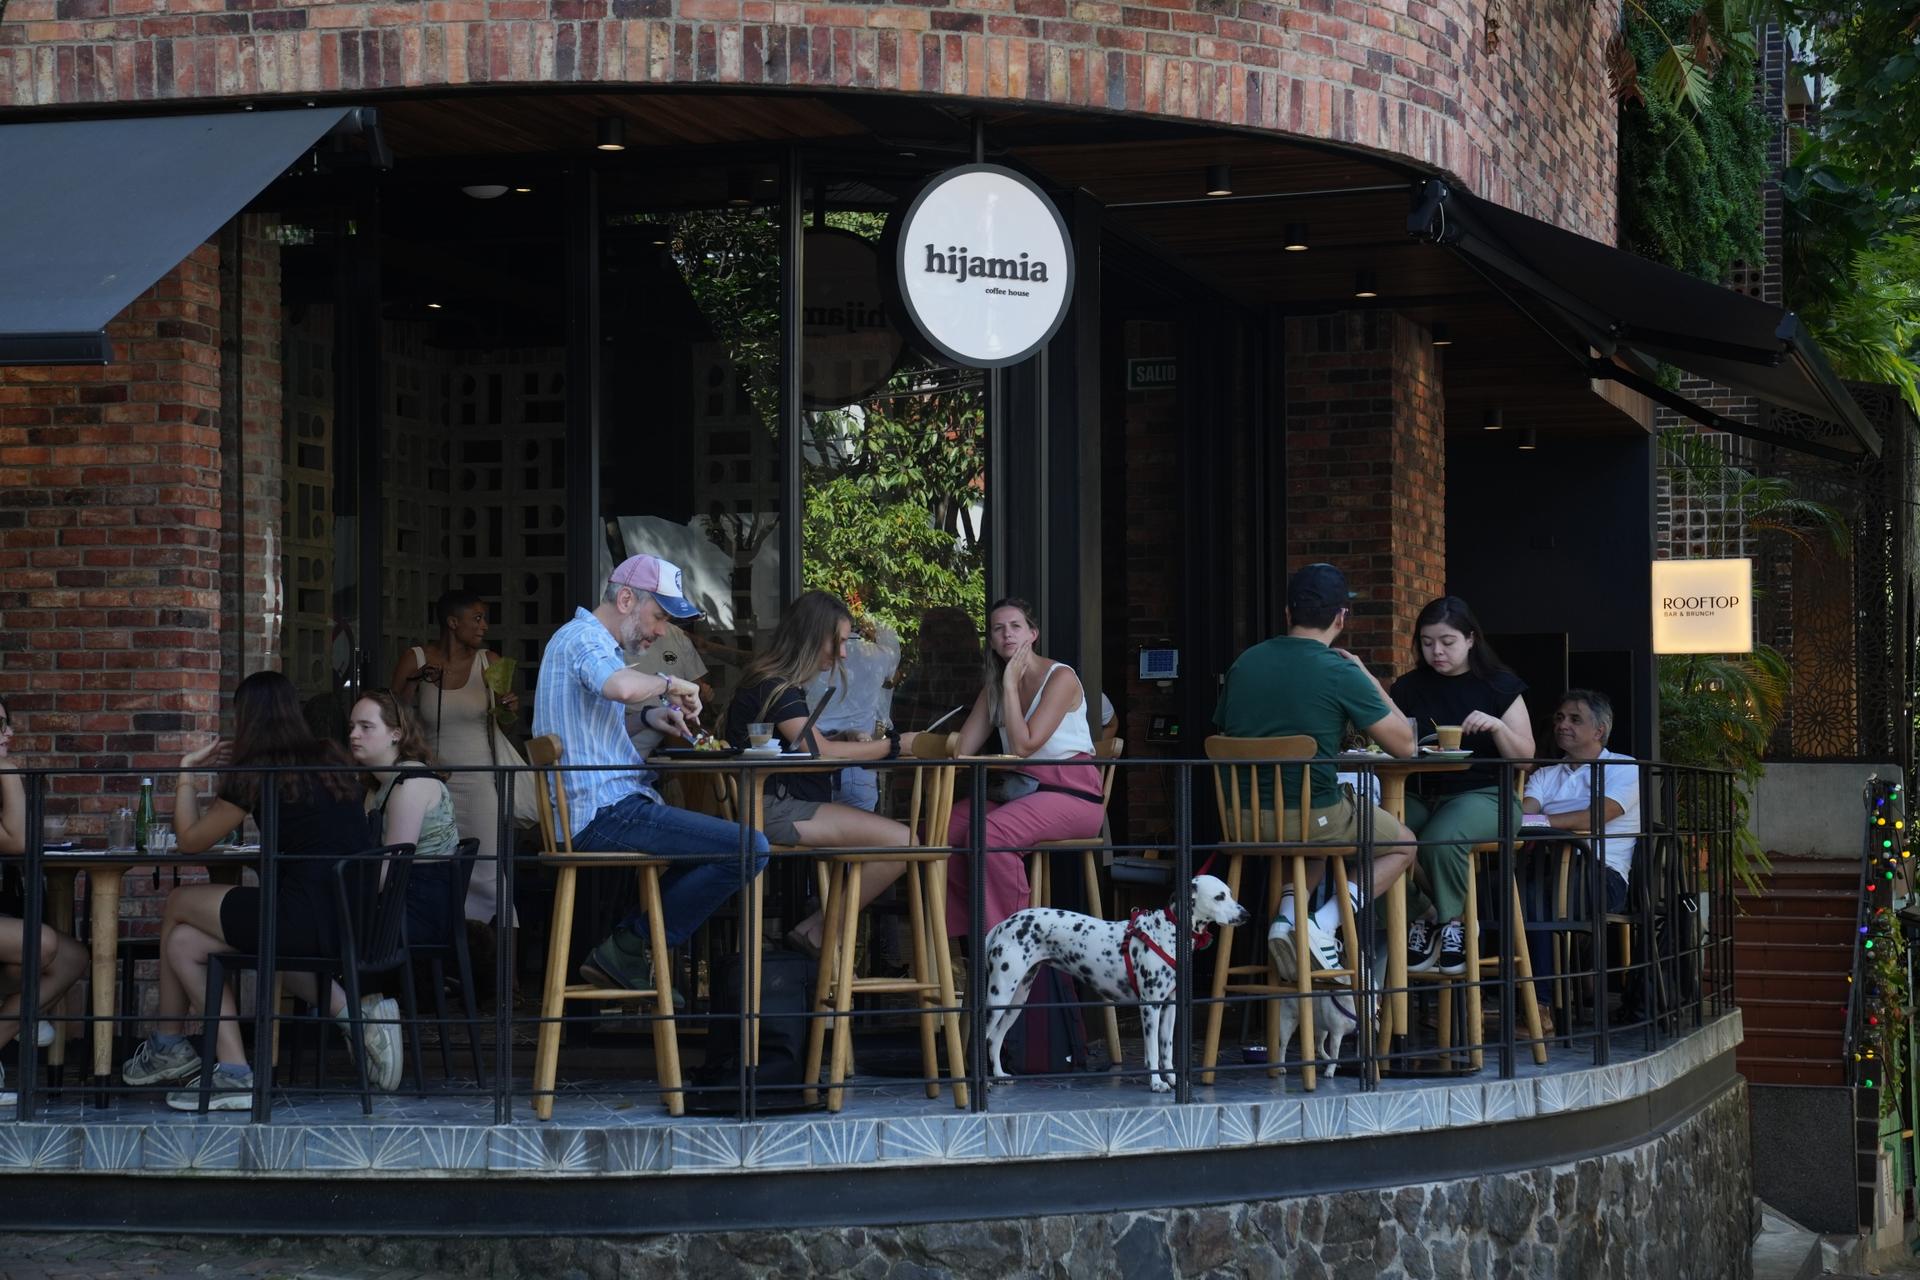 Local restaurants and cafés have benefitted from Medellín's tourism boom, as well as landlord who rent out their apartments to digital nomads and others who stay in Medellín for several days.